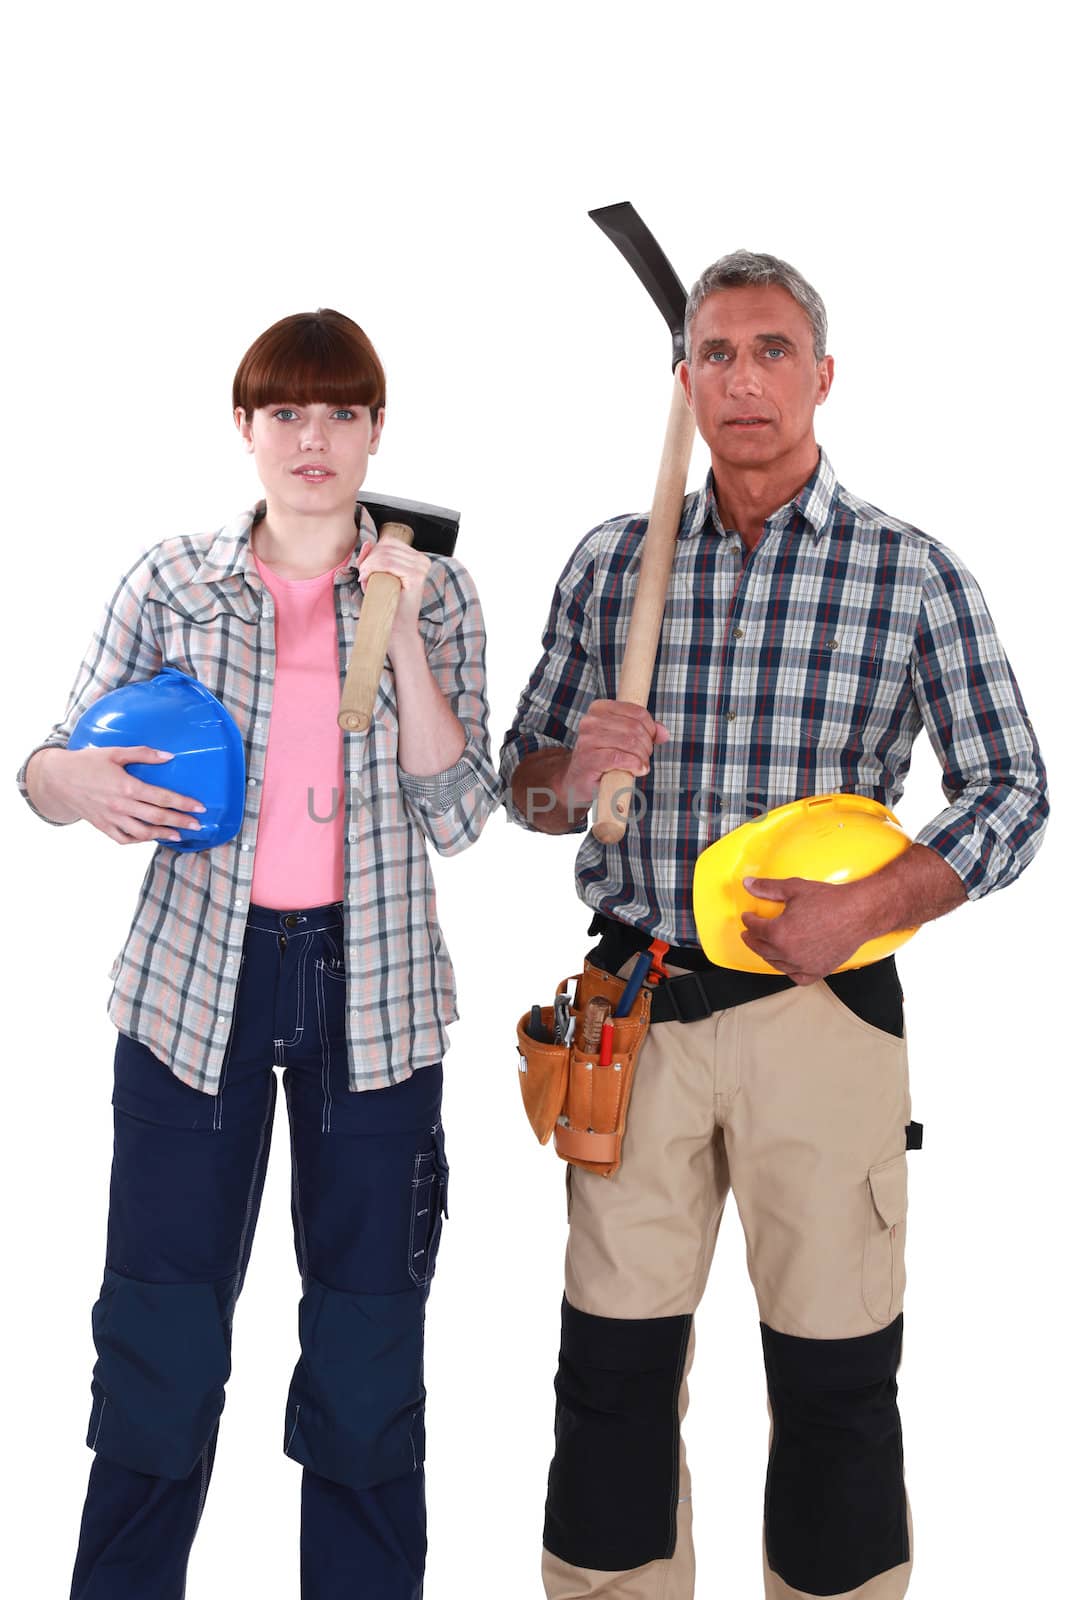 two construction workers posing together